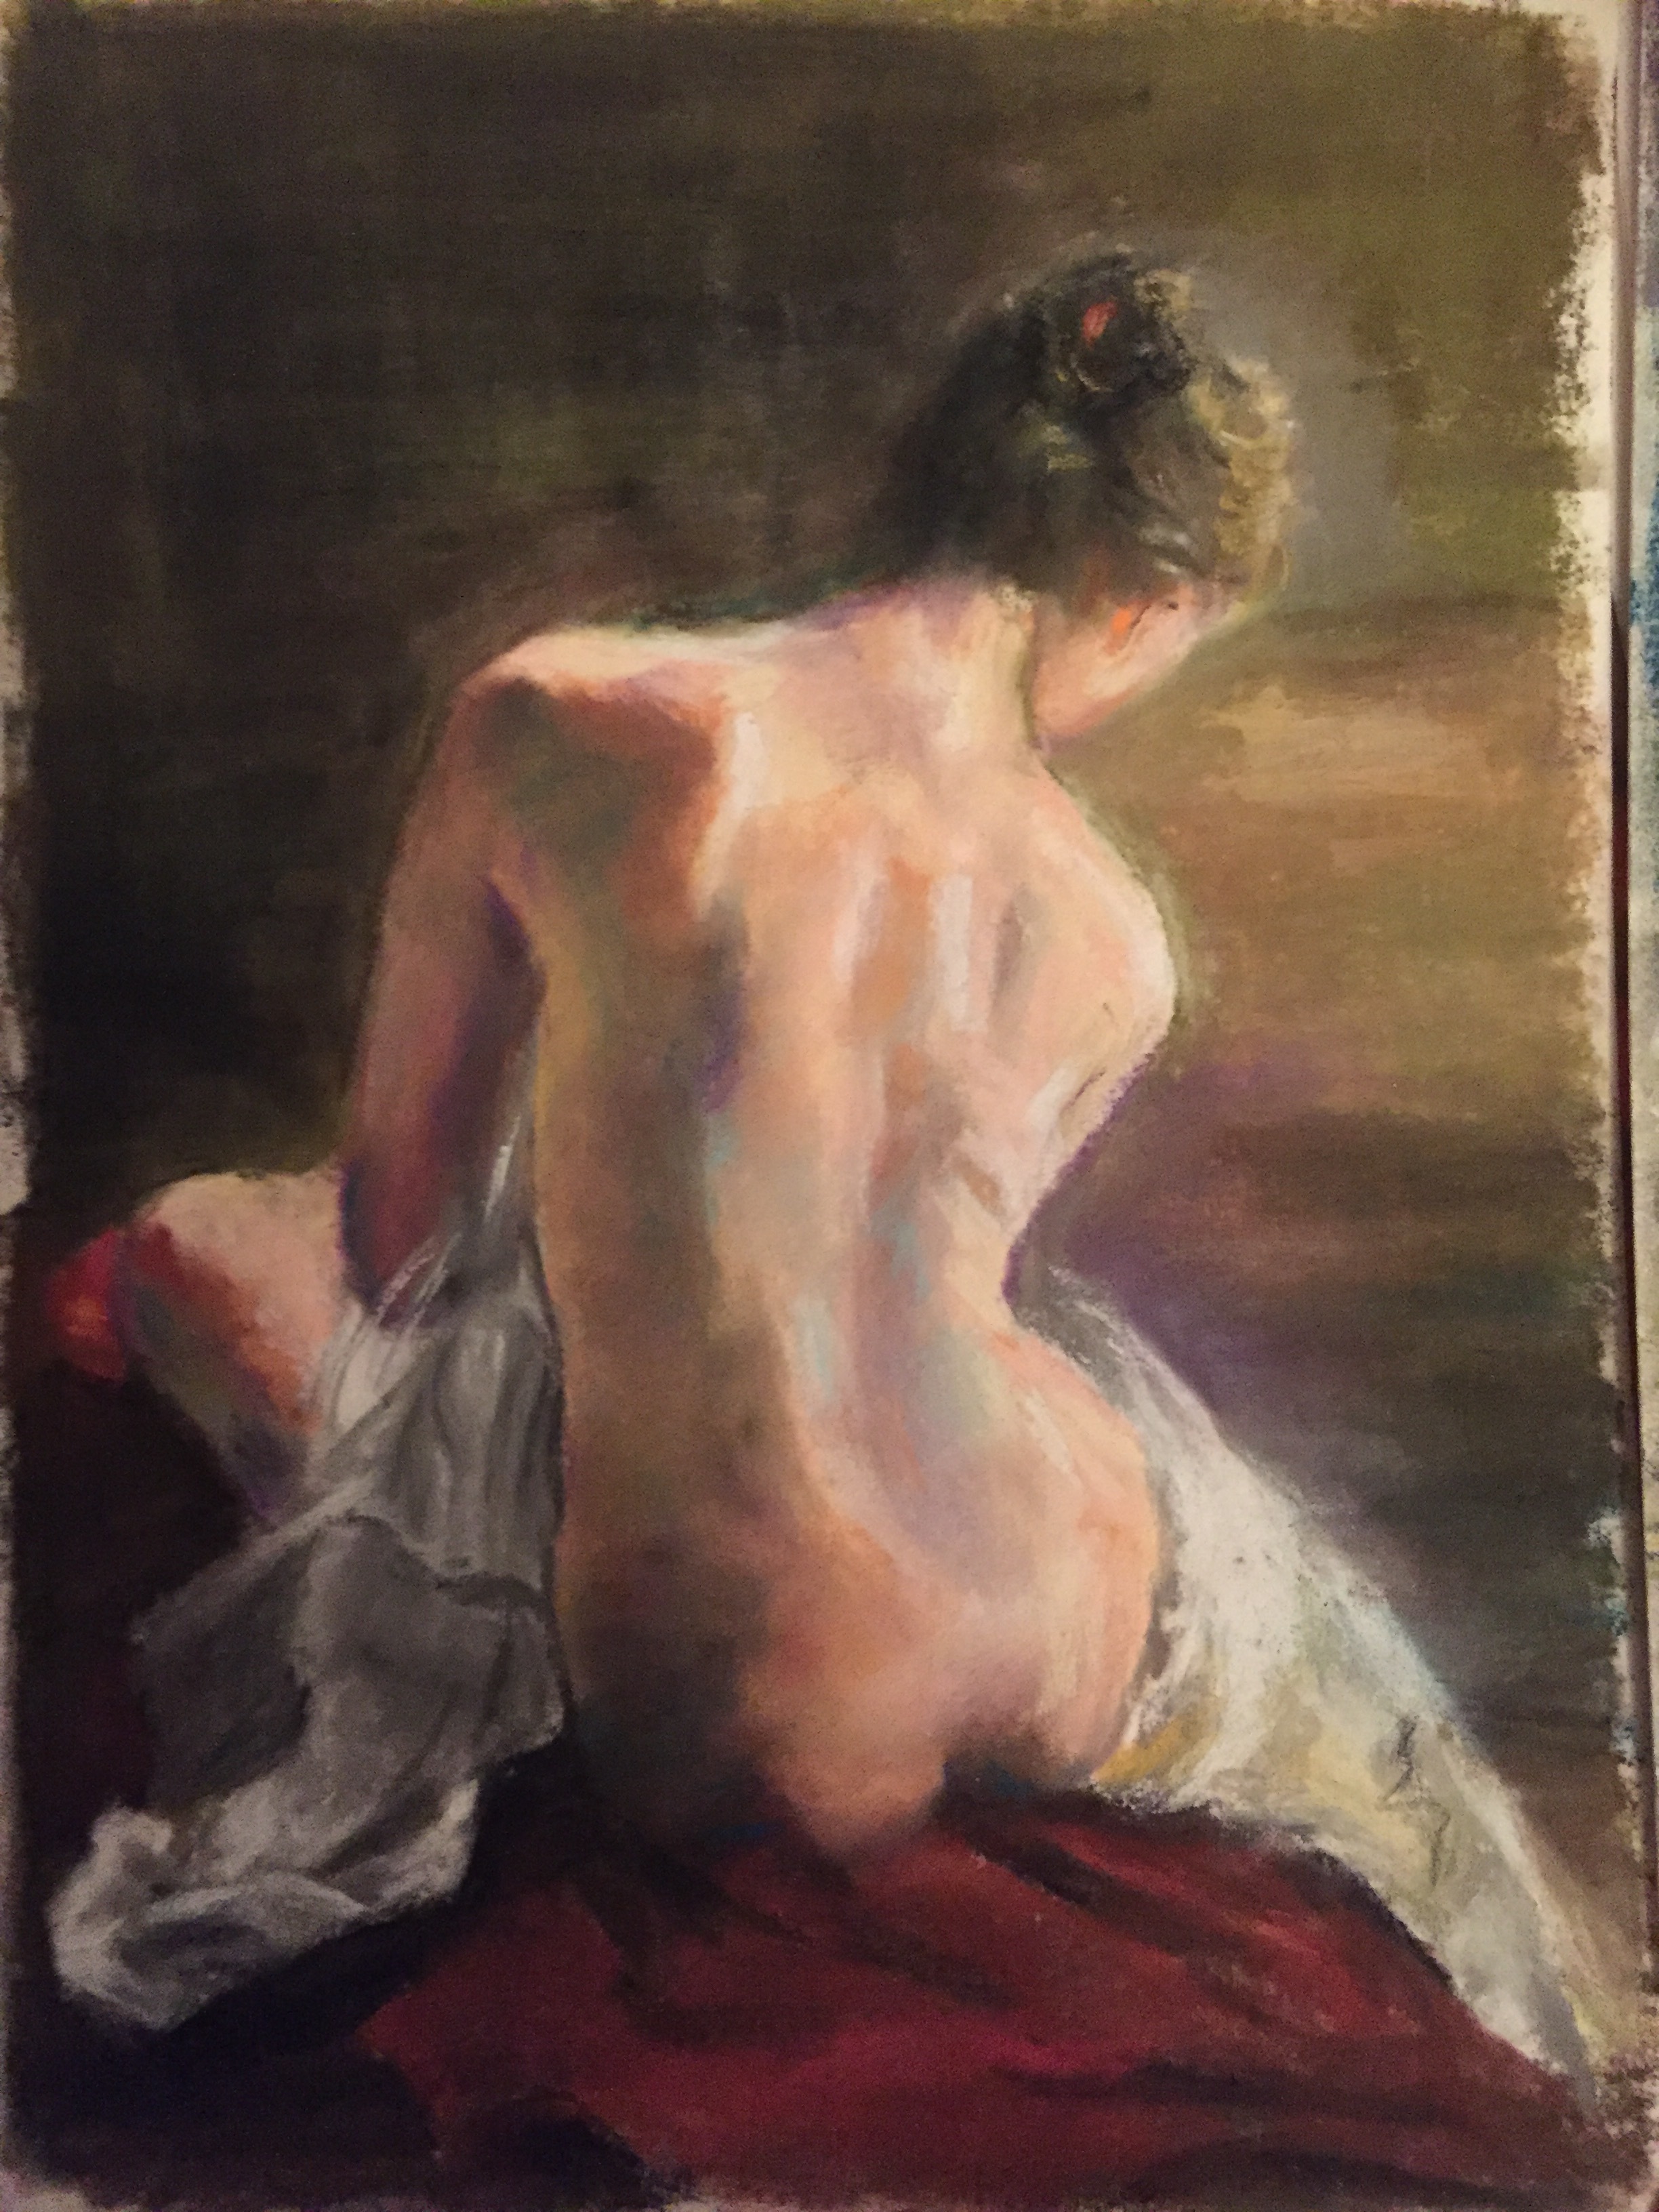 Nude study I, pastels on paper